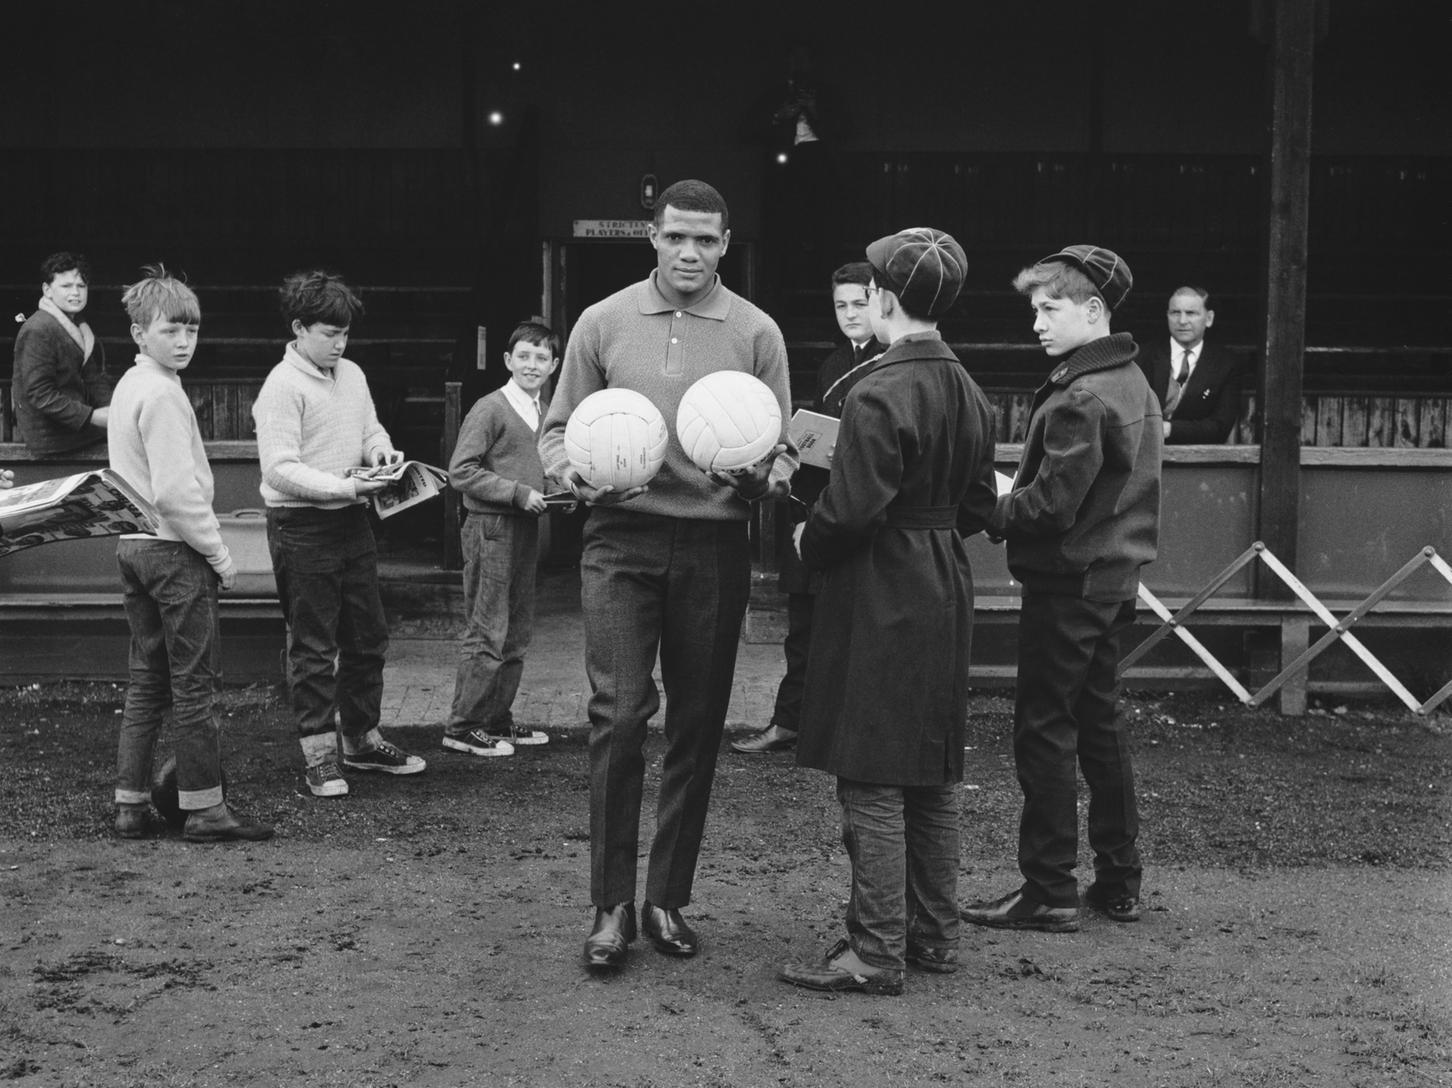 South African footballer Albert Johanneson with fans at the Hendon Football Club ground, London, during a team training session before the FA Cup final against Liverpool.